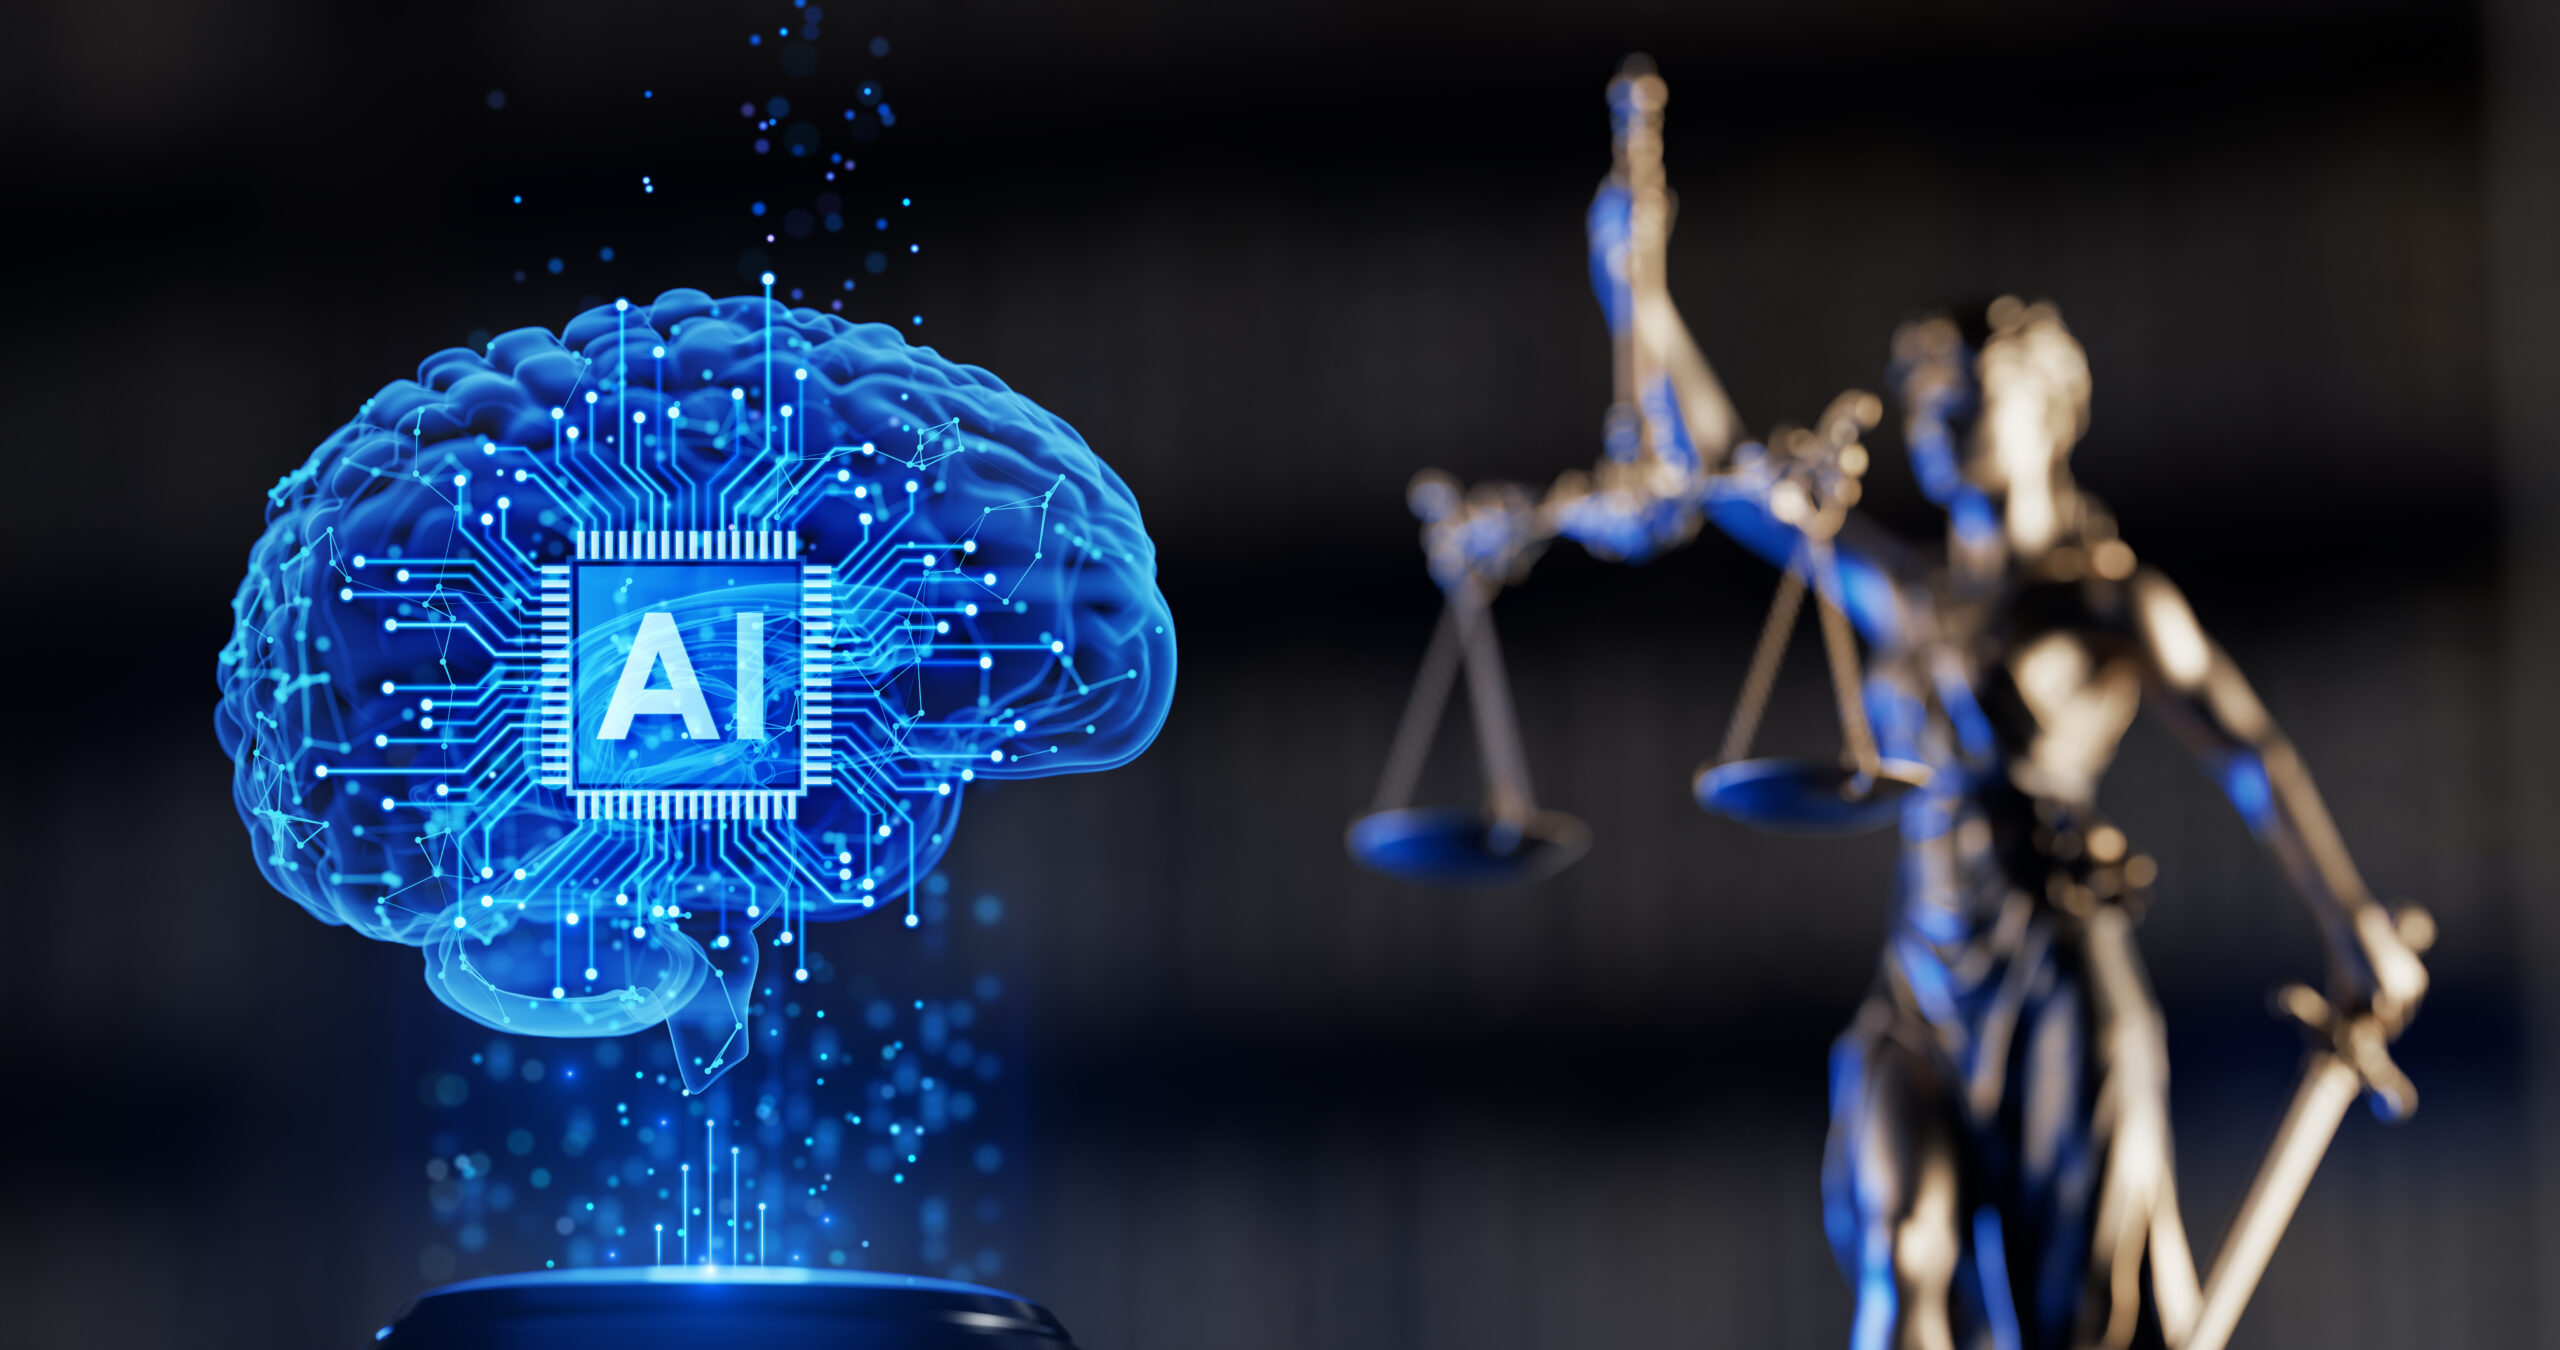 How can we safeguard equality and fundamental rights against AI-generated violations?